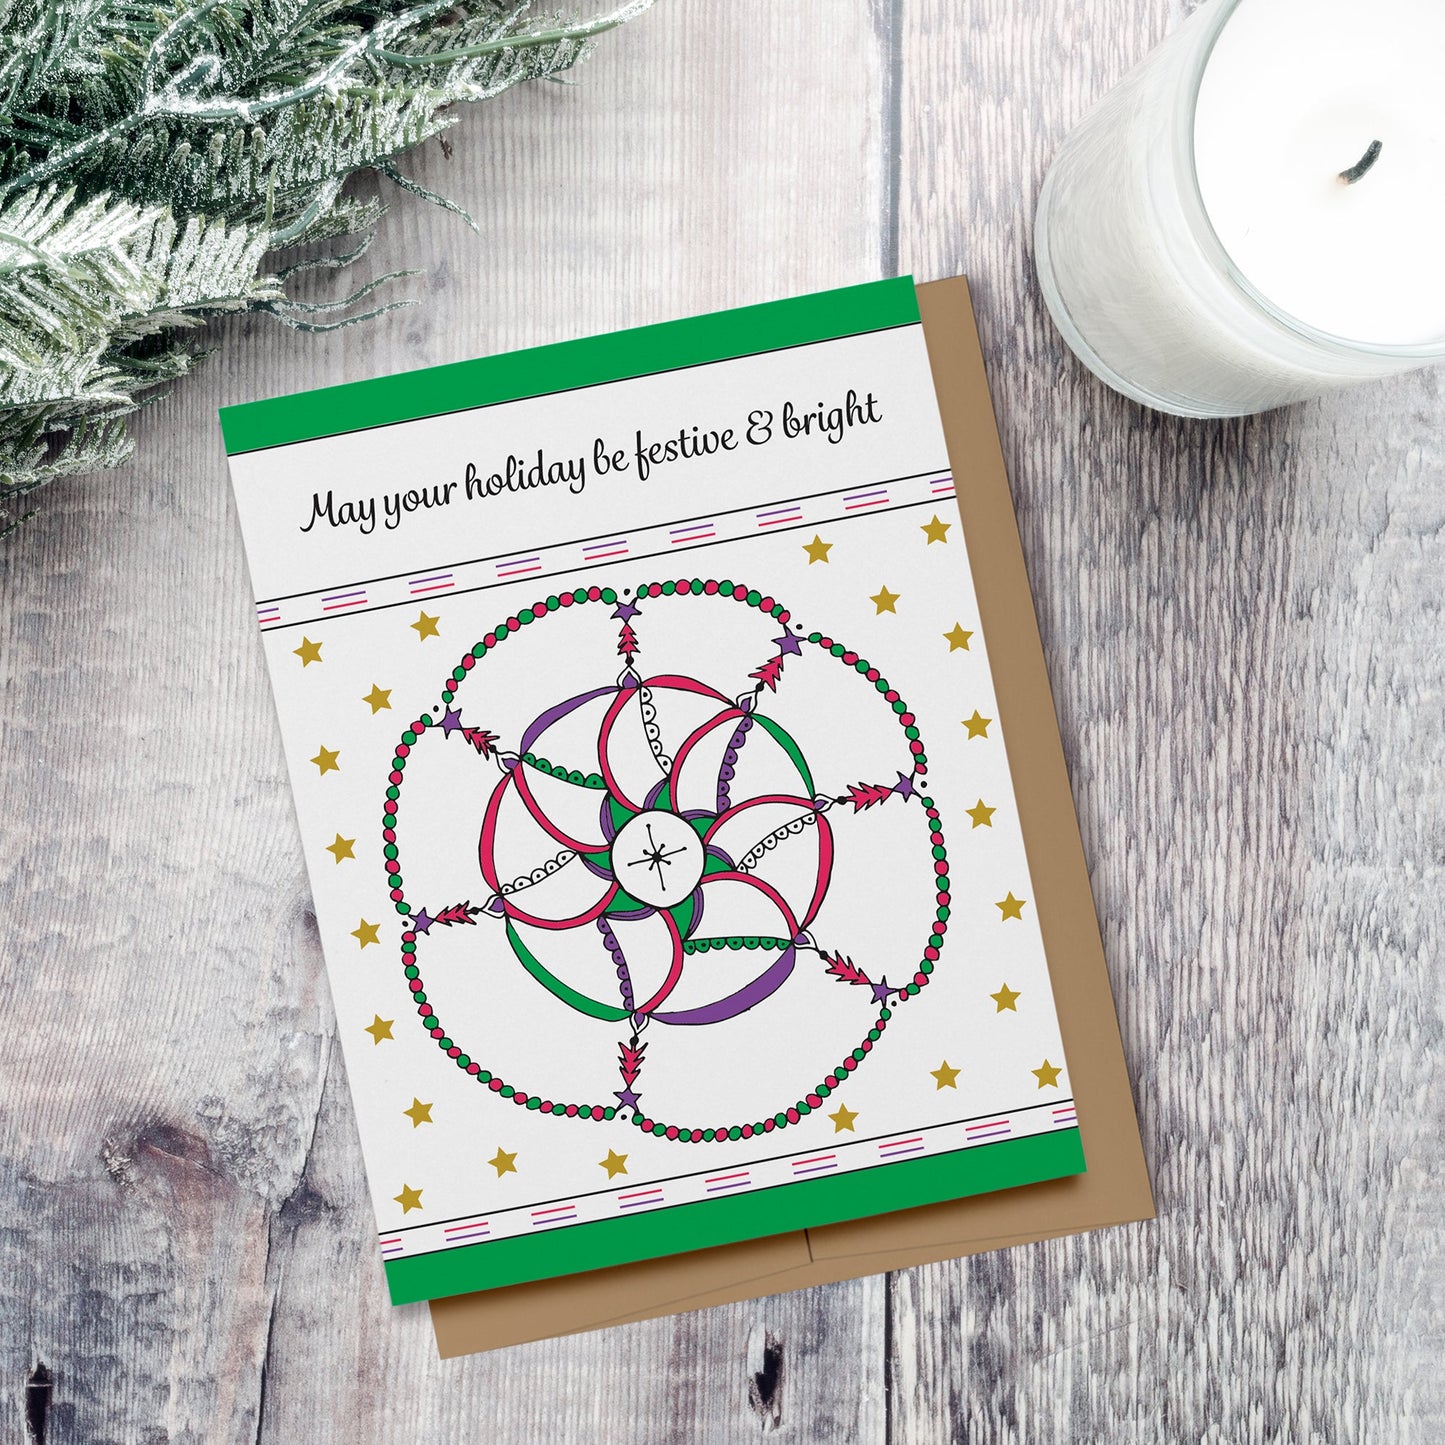 Colorful holiday card with a hand drawn mandala featuring trees and stars on a star-filled background with text which reads, "May your holiday be festive & bright." Displayed on a wood background with a candle and evergreen branch.